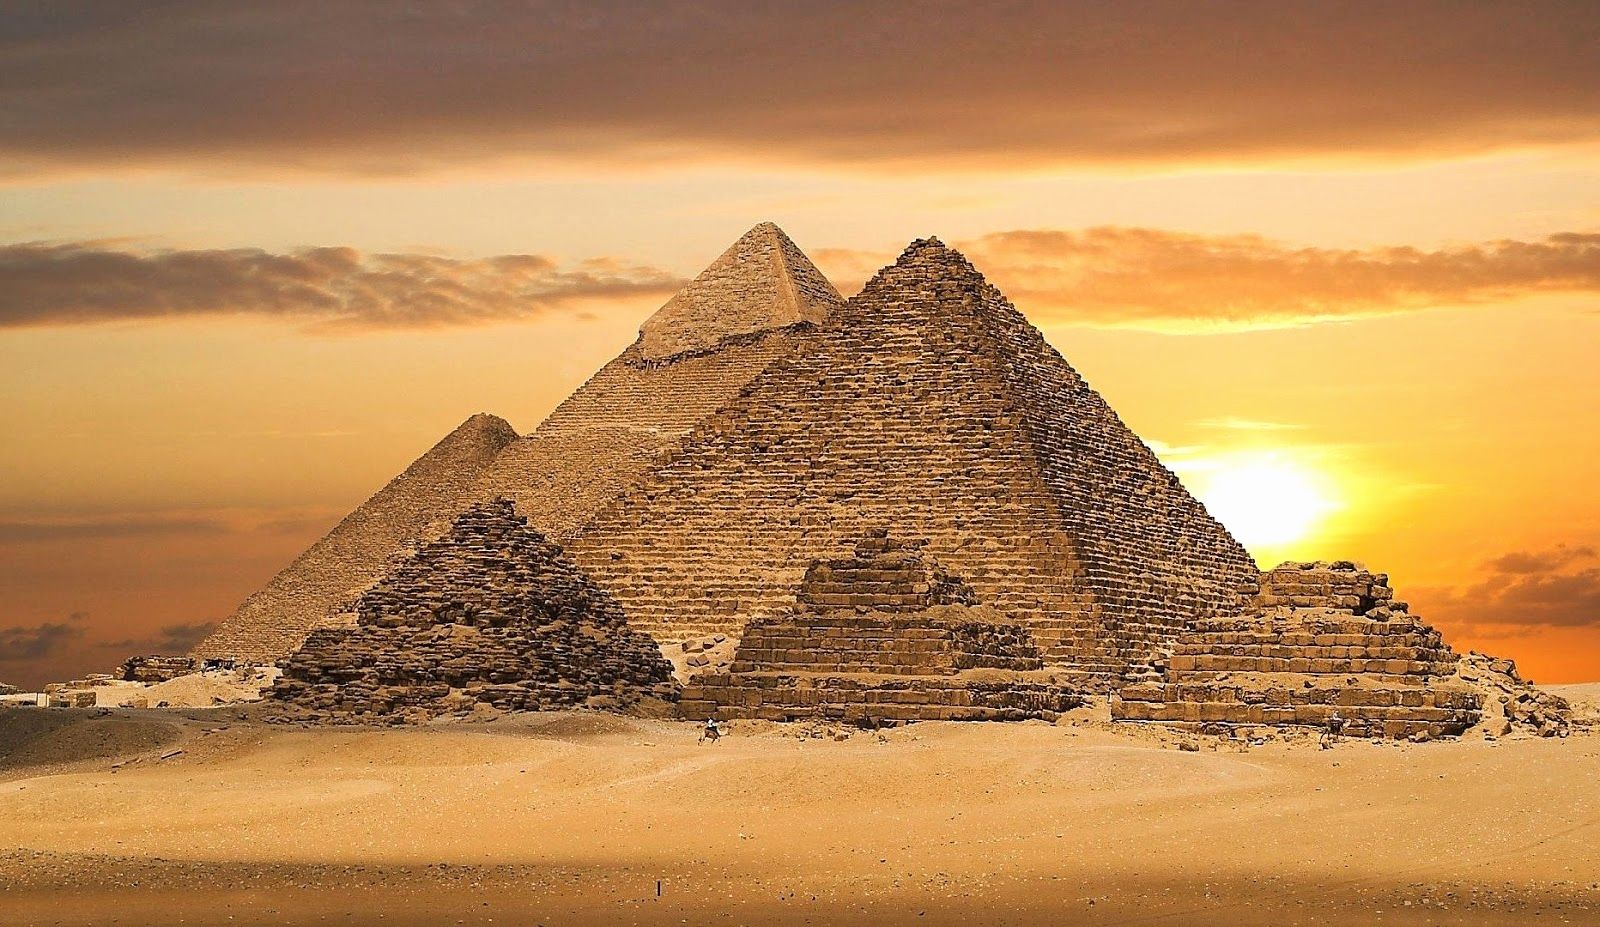 Pyramid Wallpapers Best Of the Great Pyramid Of Giza All Travel Info This Month